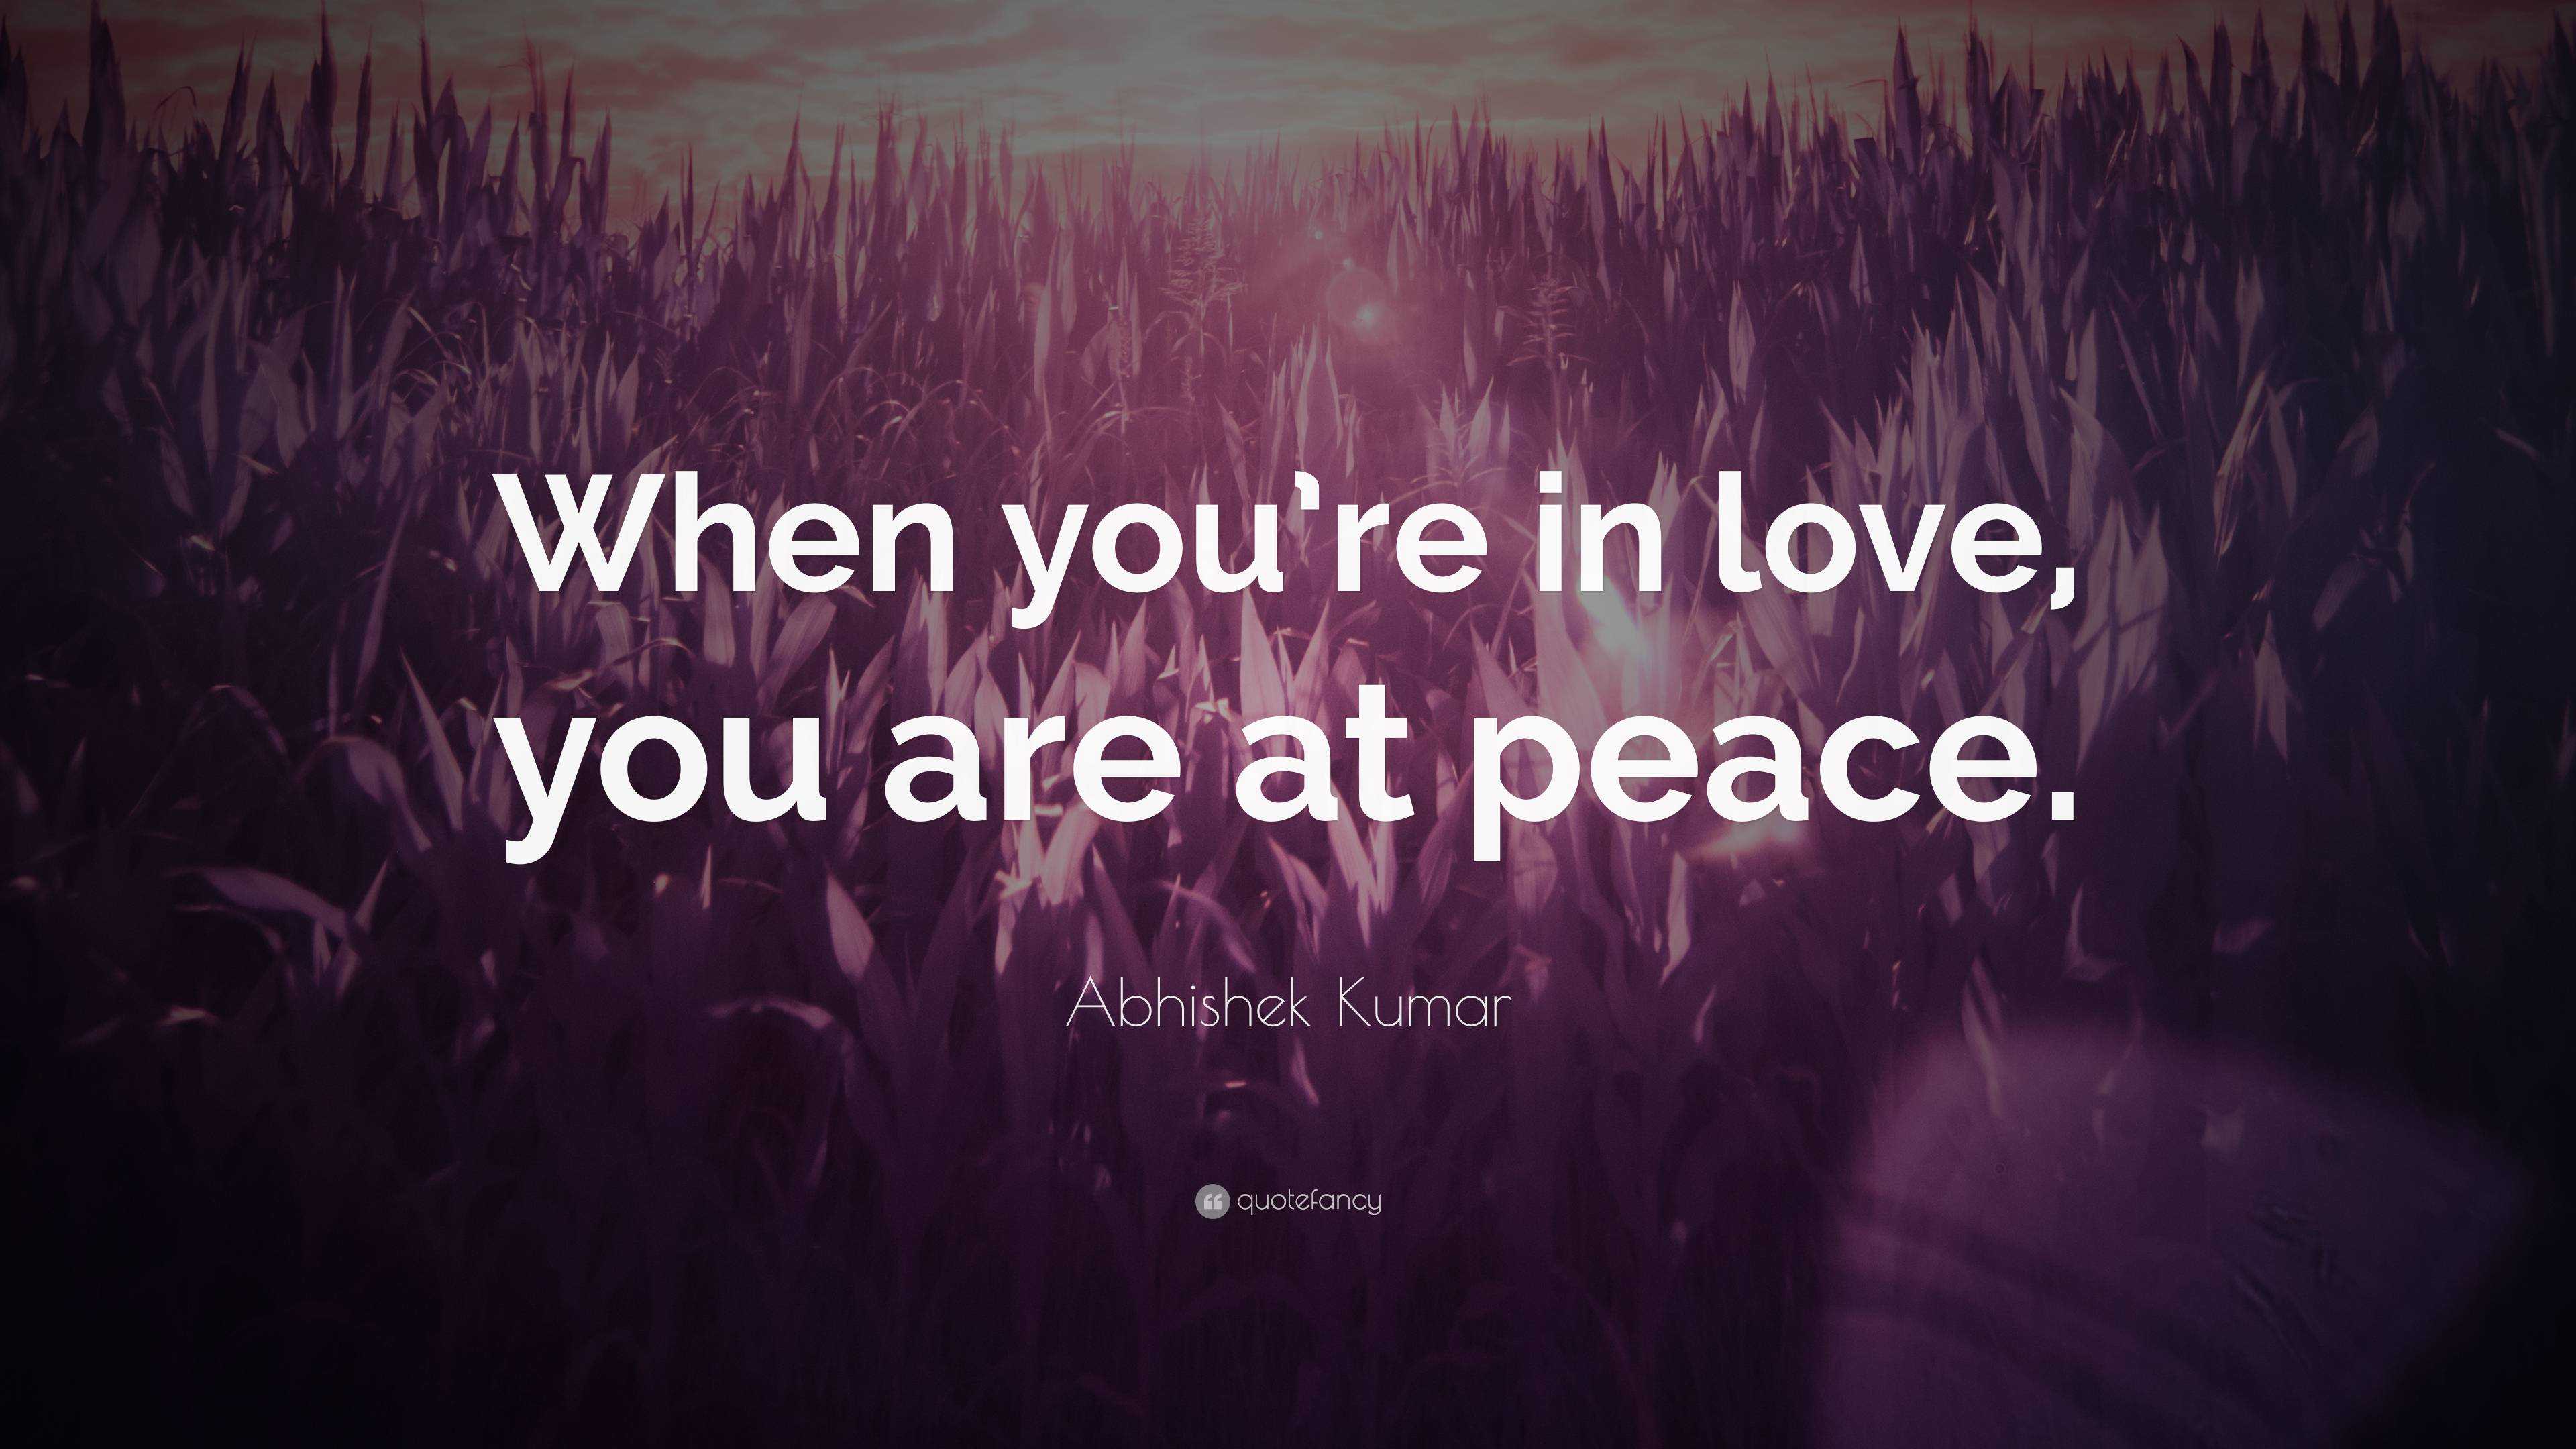 Abhishek Kumar Quote: “When you're in love, you are at peace.”